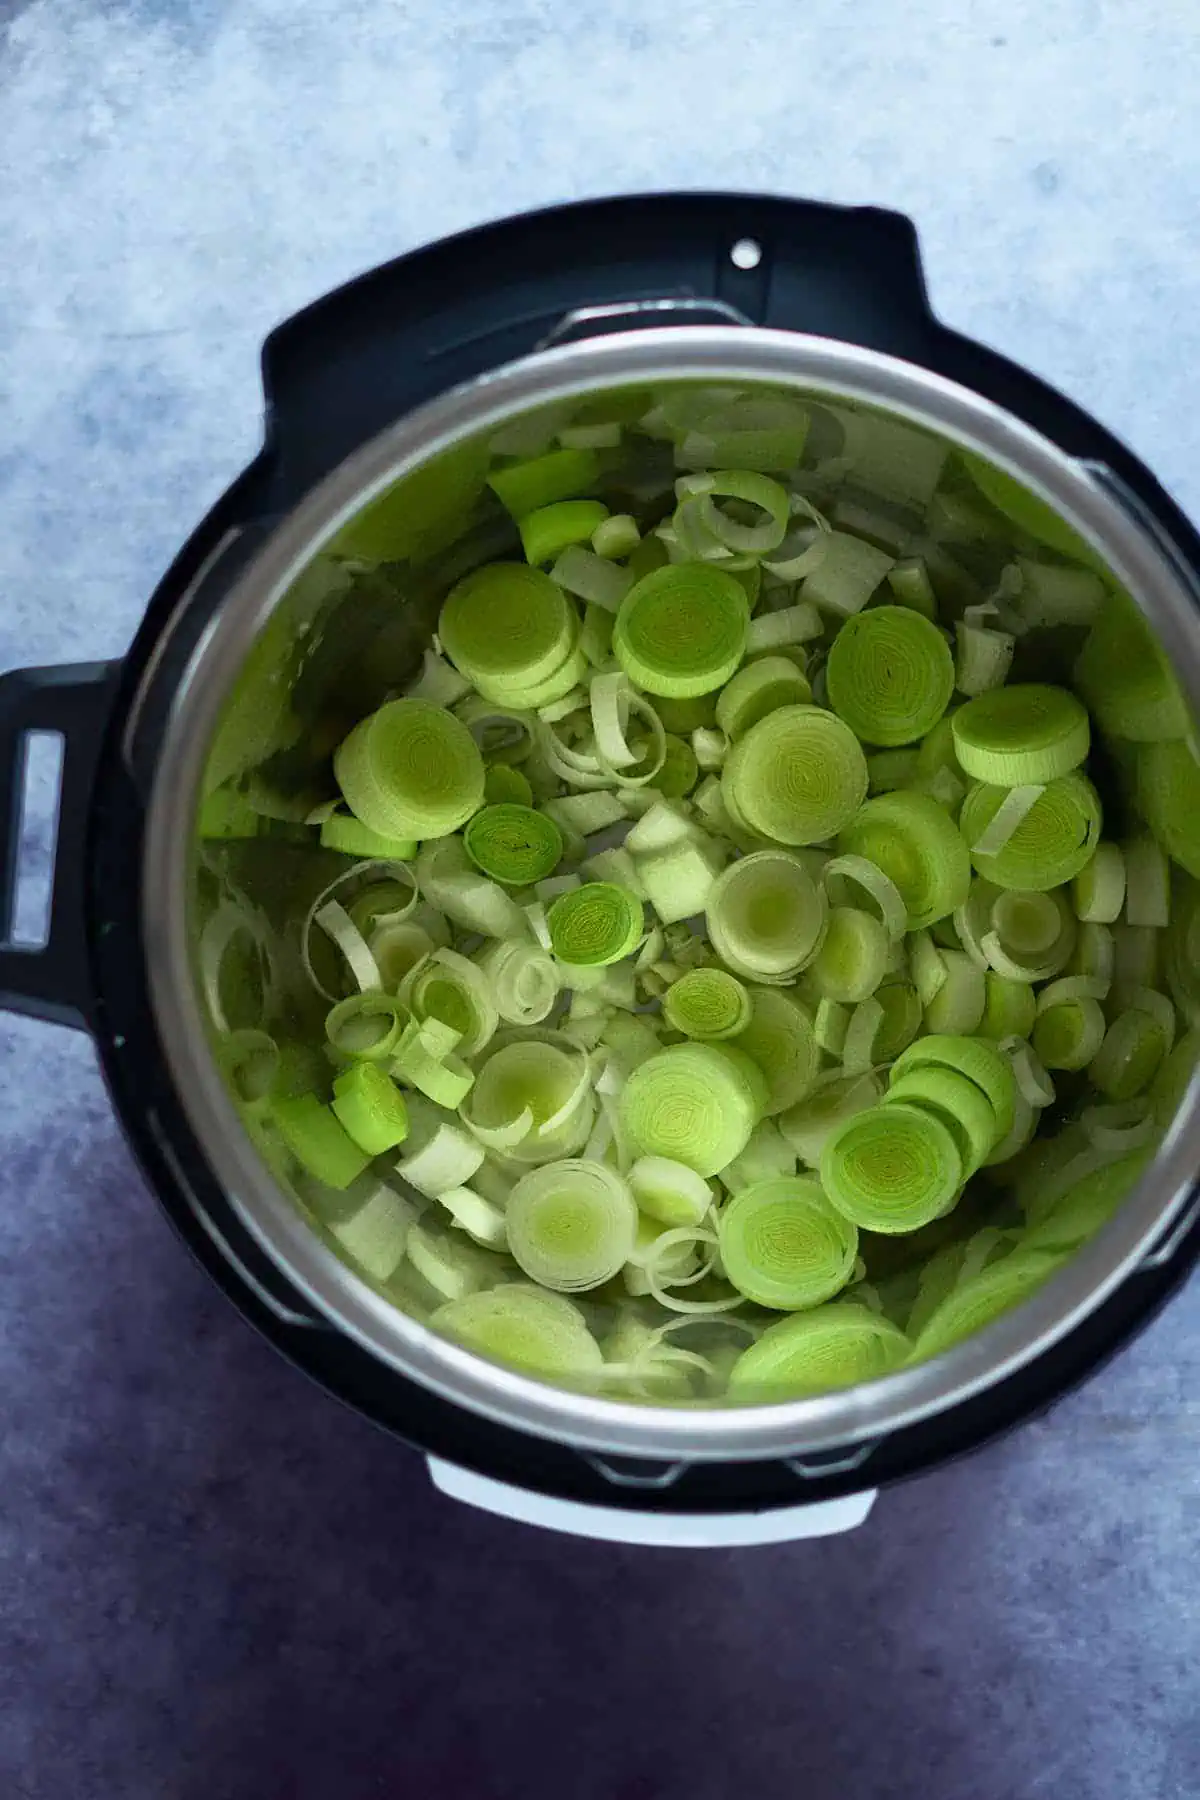 Leeks and onion inside the instant pot inner pot.